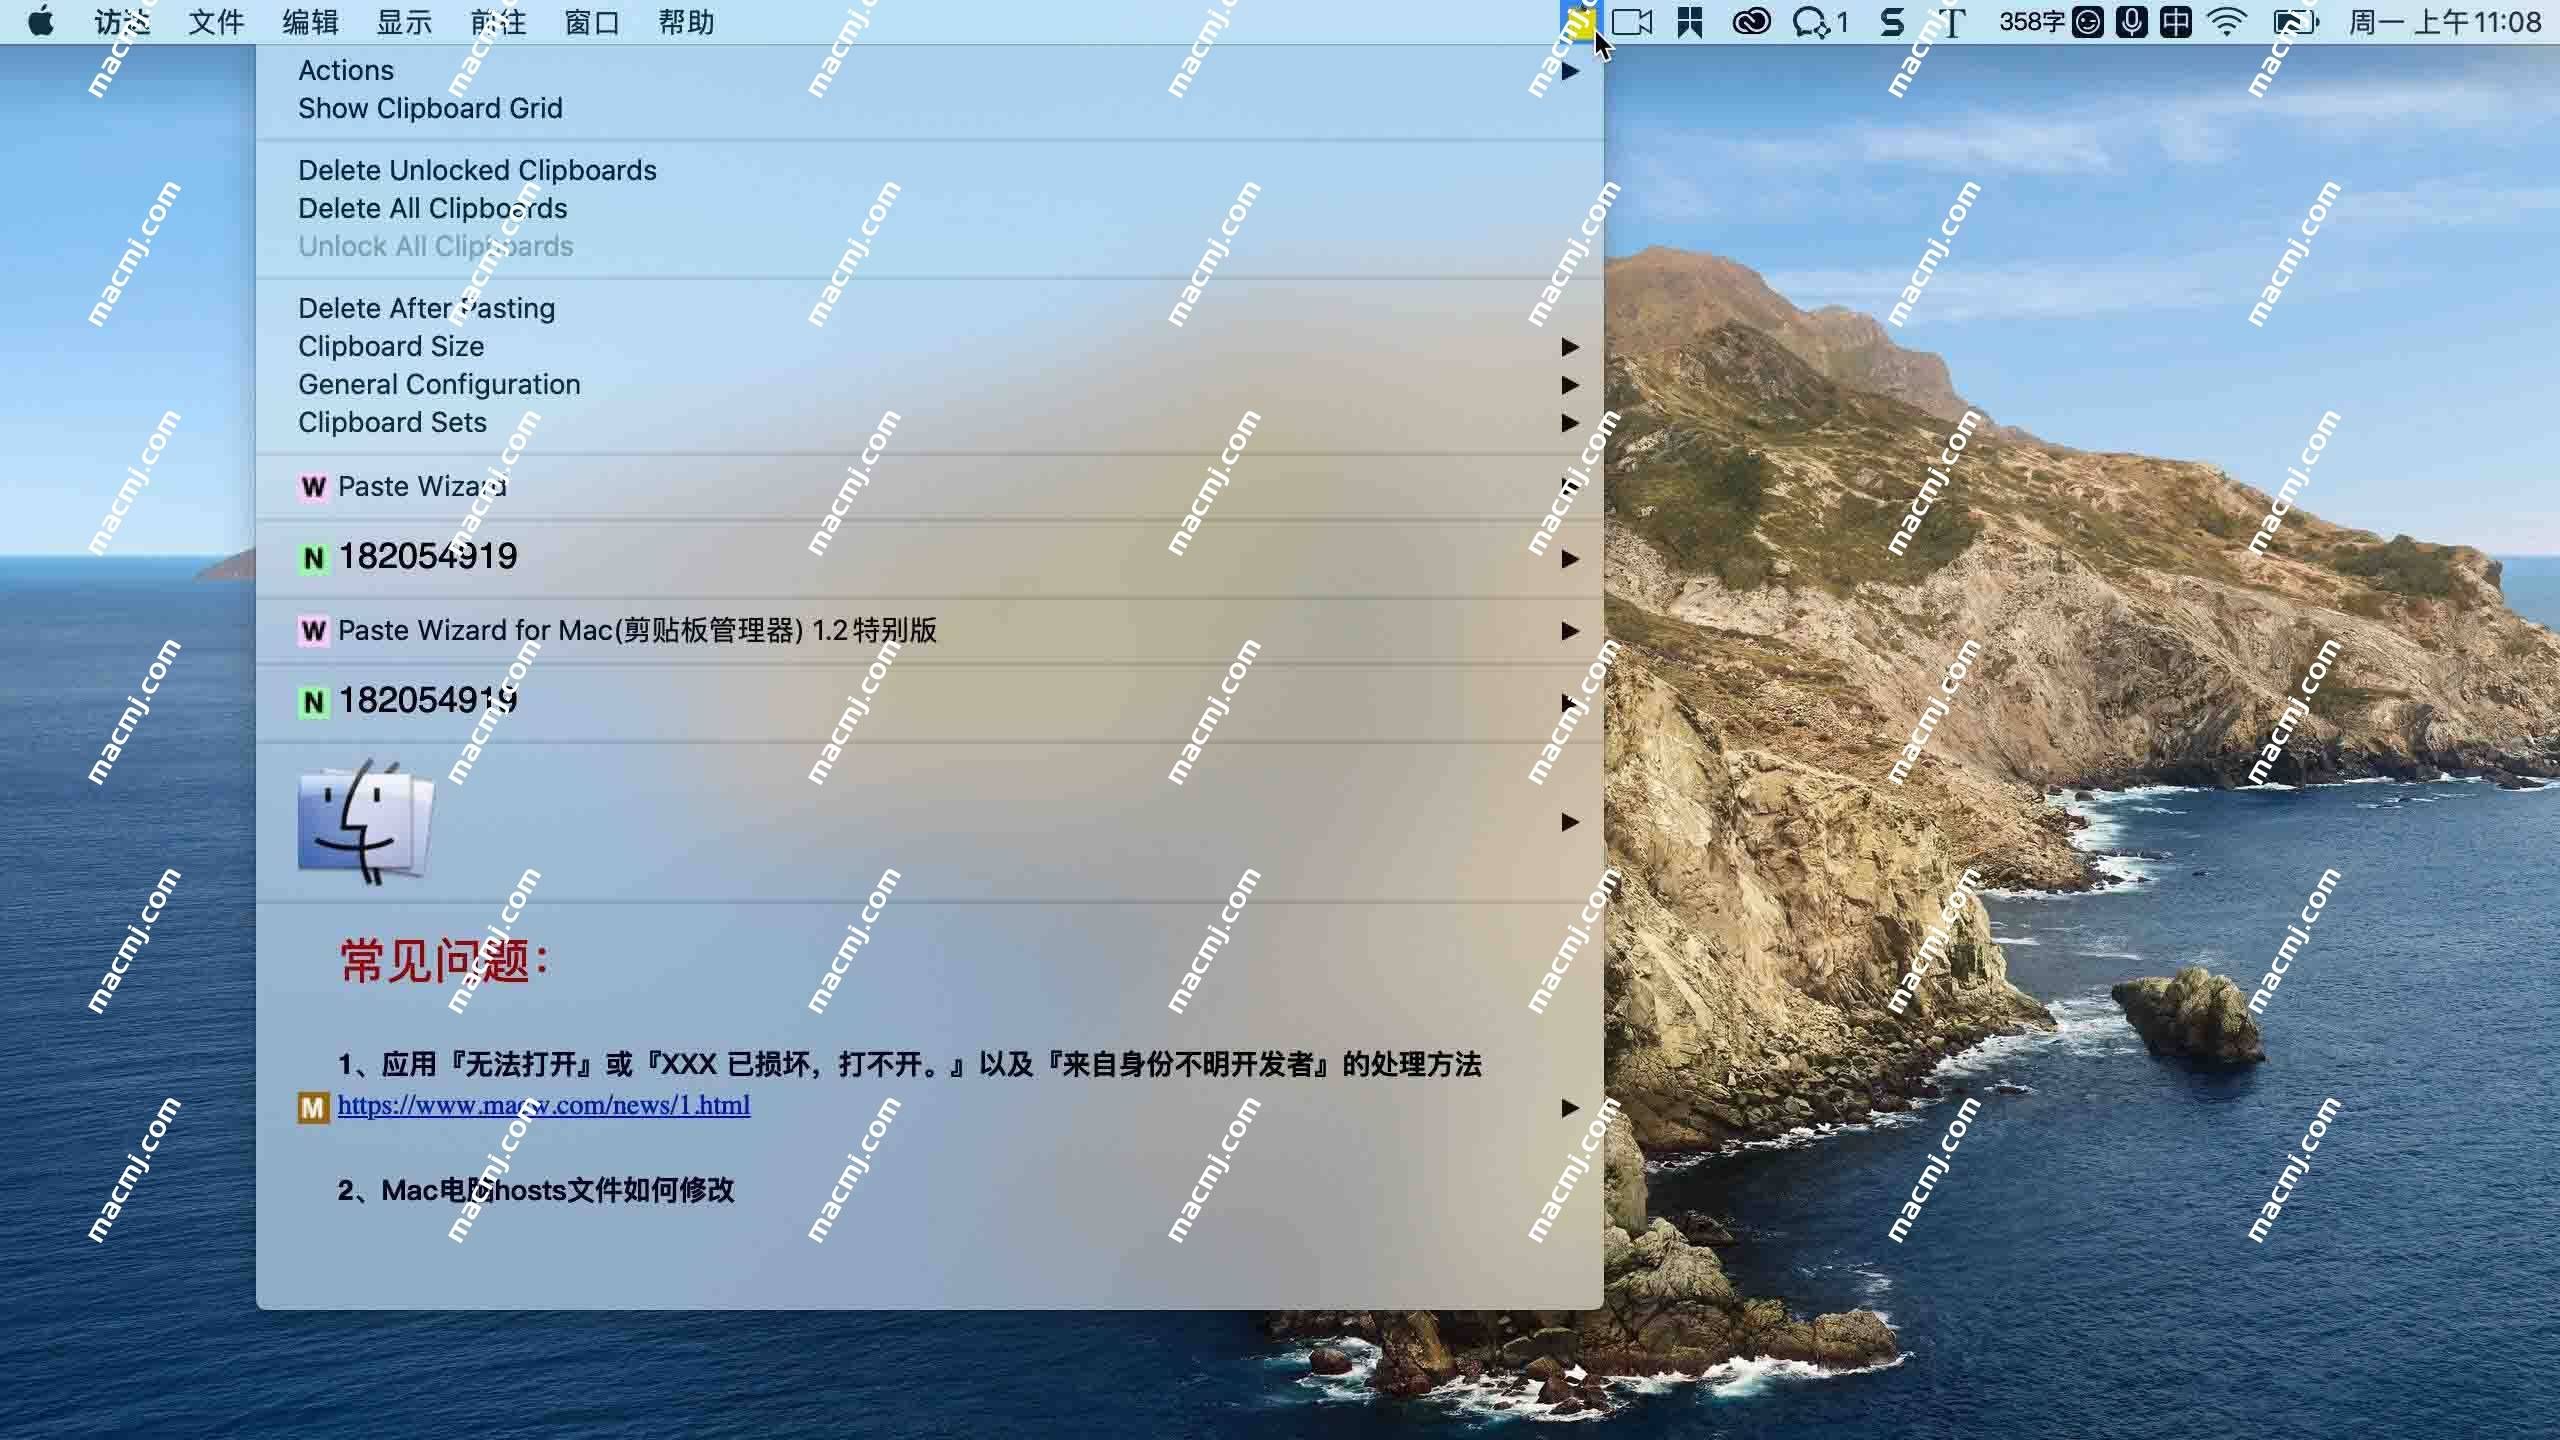 Paste Wizard for Mac(剪贴板管理器)